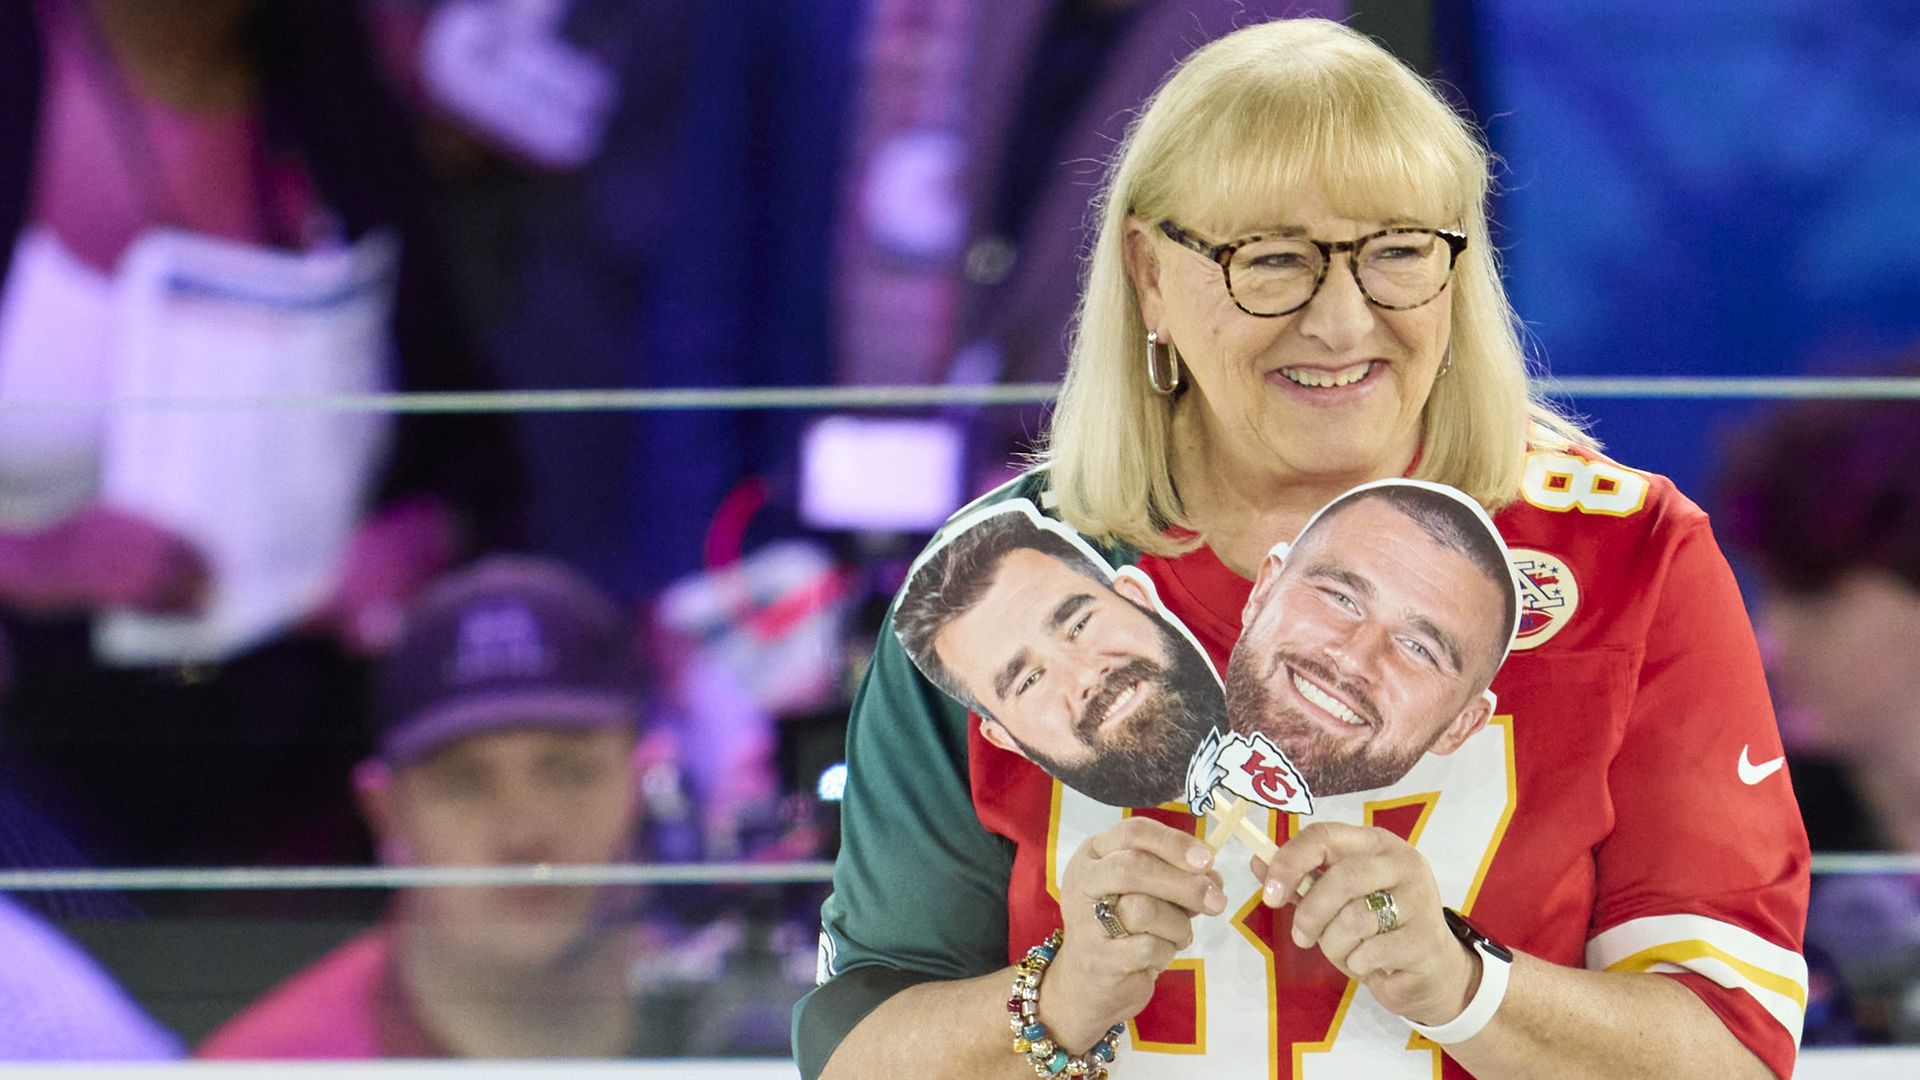 Donna Kelce, the mother of two NFL players, holds up photos of them.